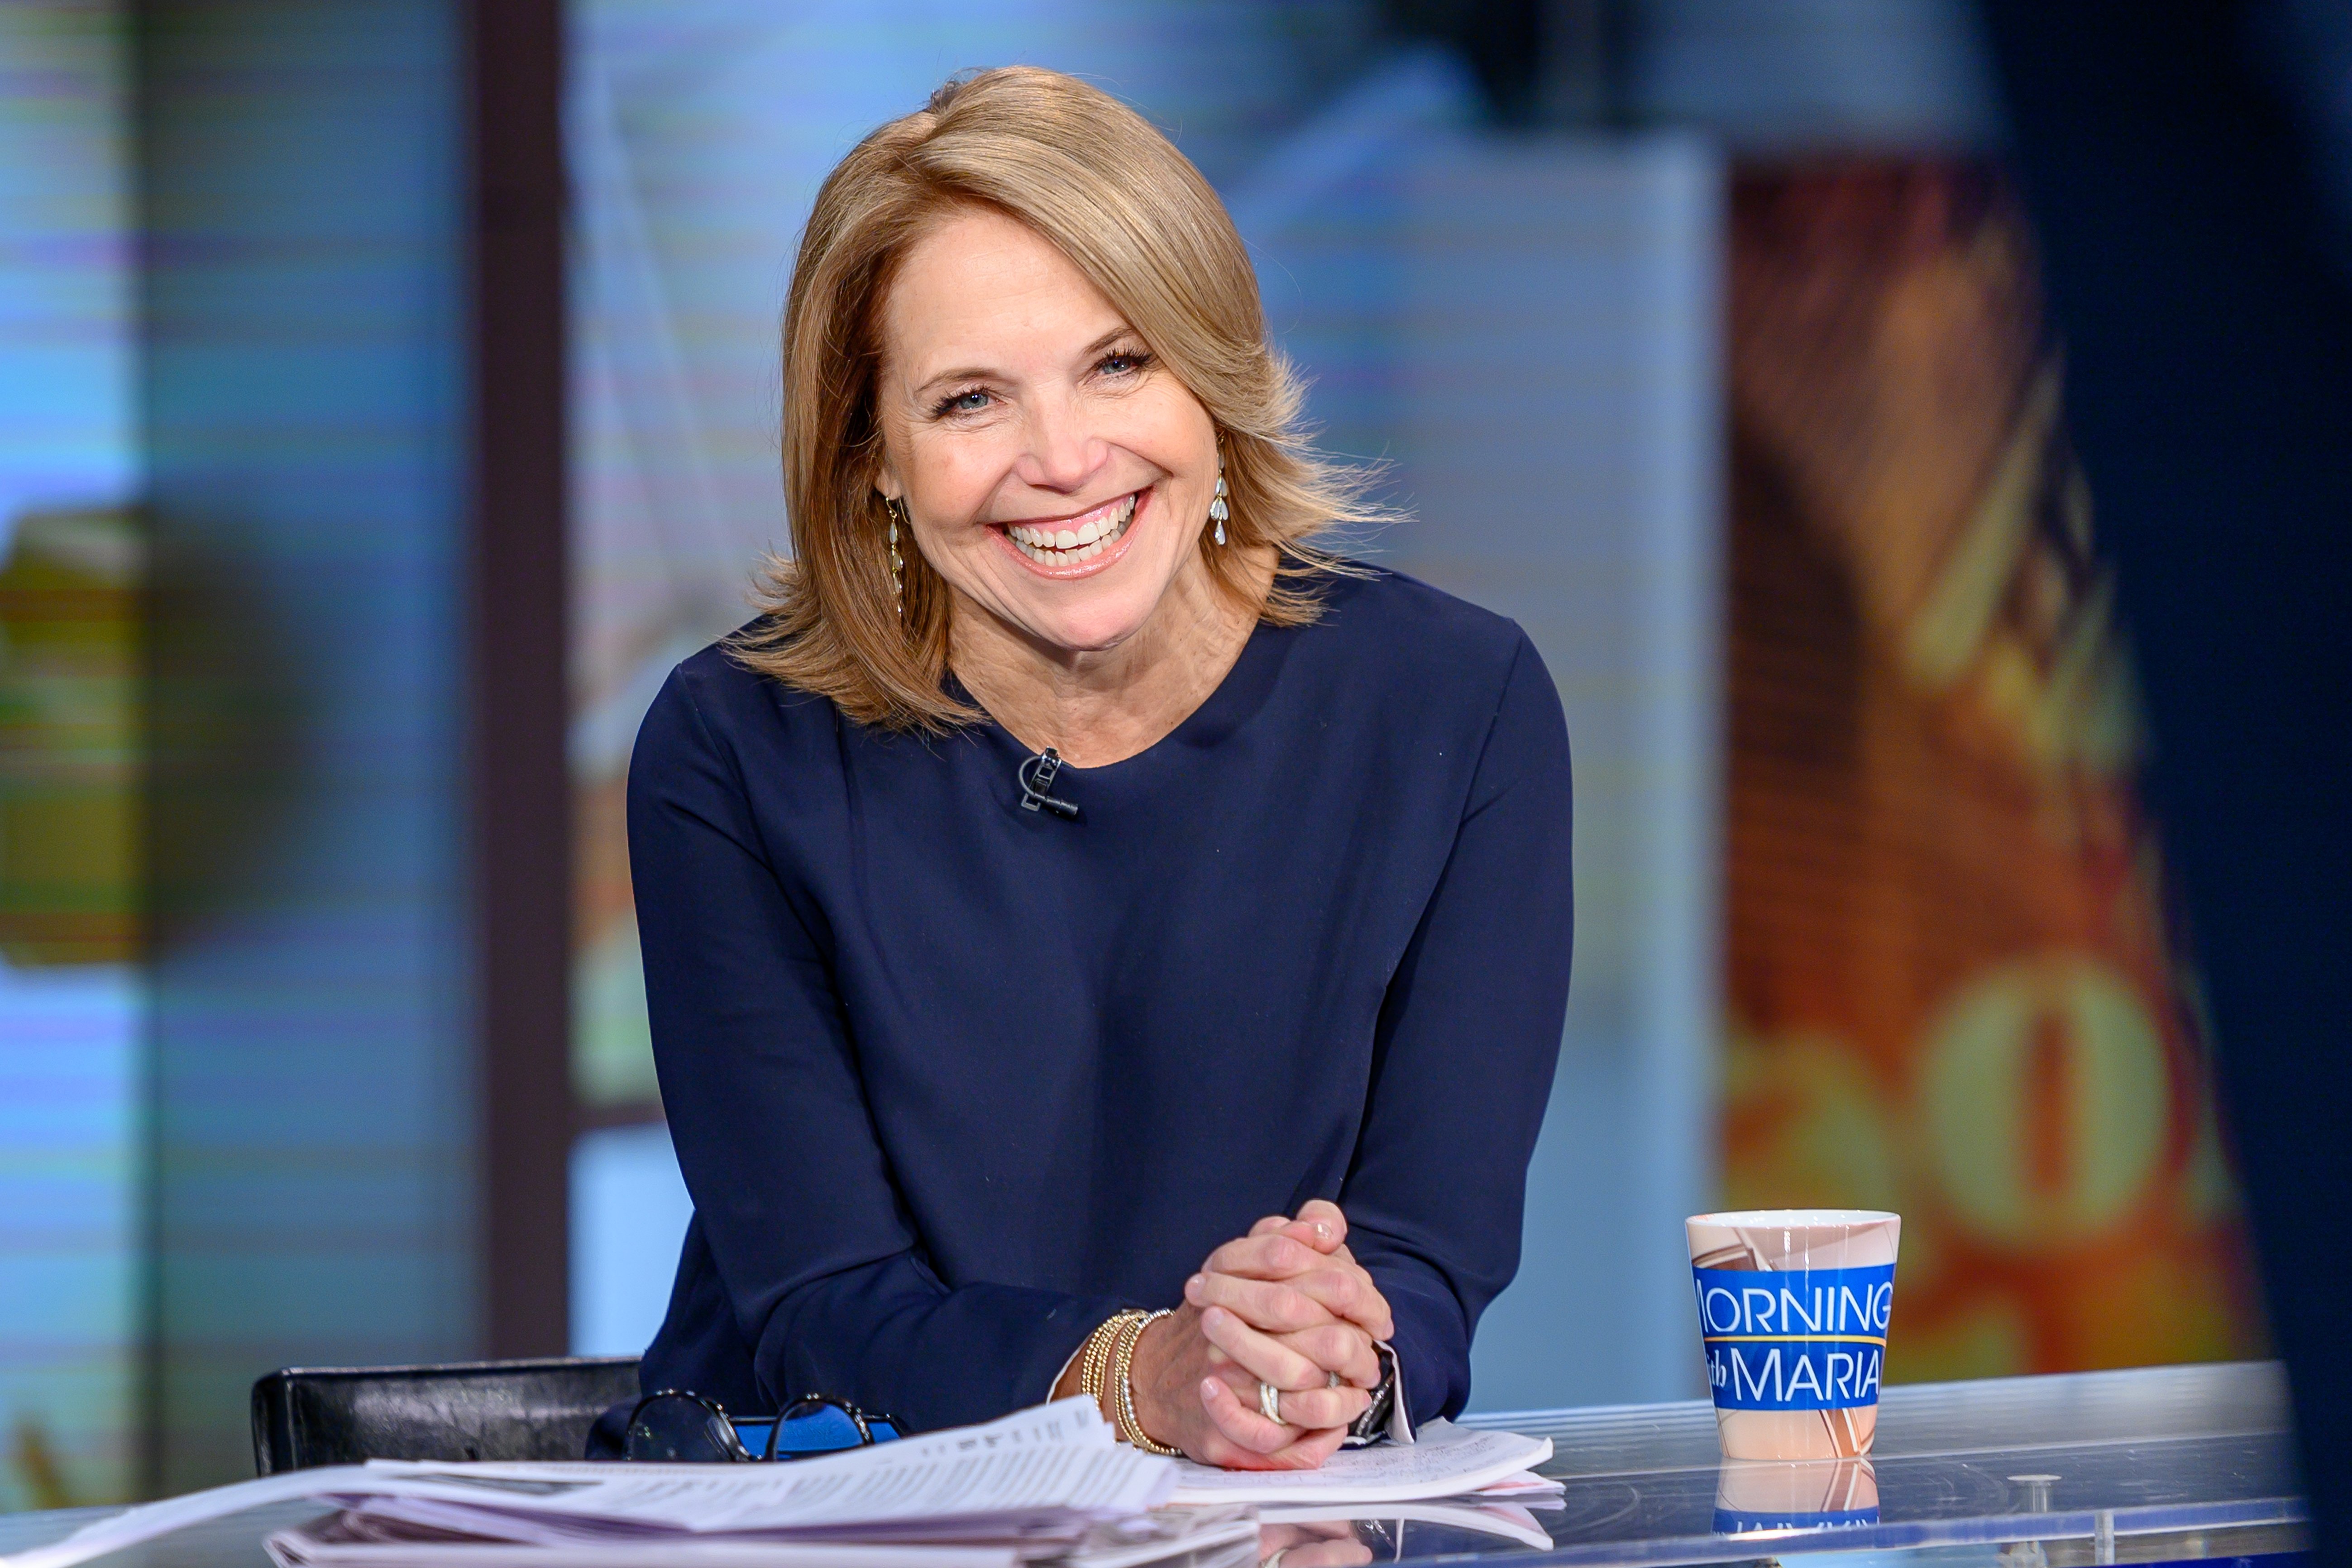  Katie Couric at "Mornings With Maria" at Fox Business Network Studios on March 20, 2019. | Photo: Getty Images